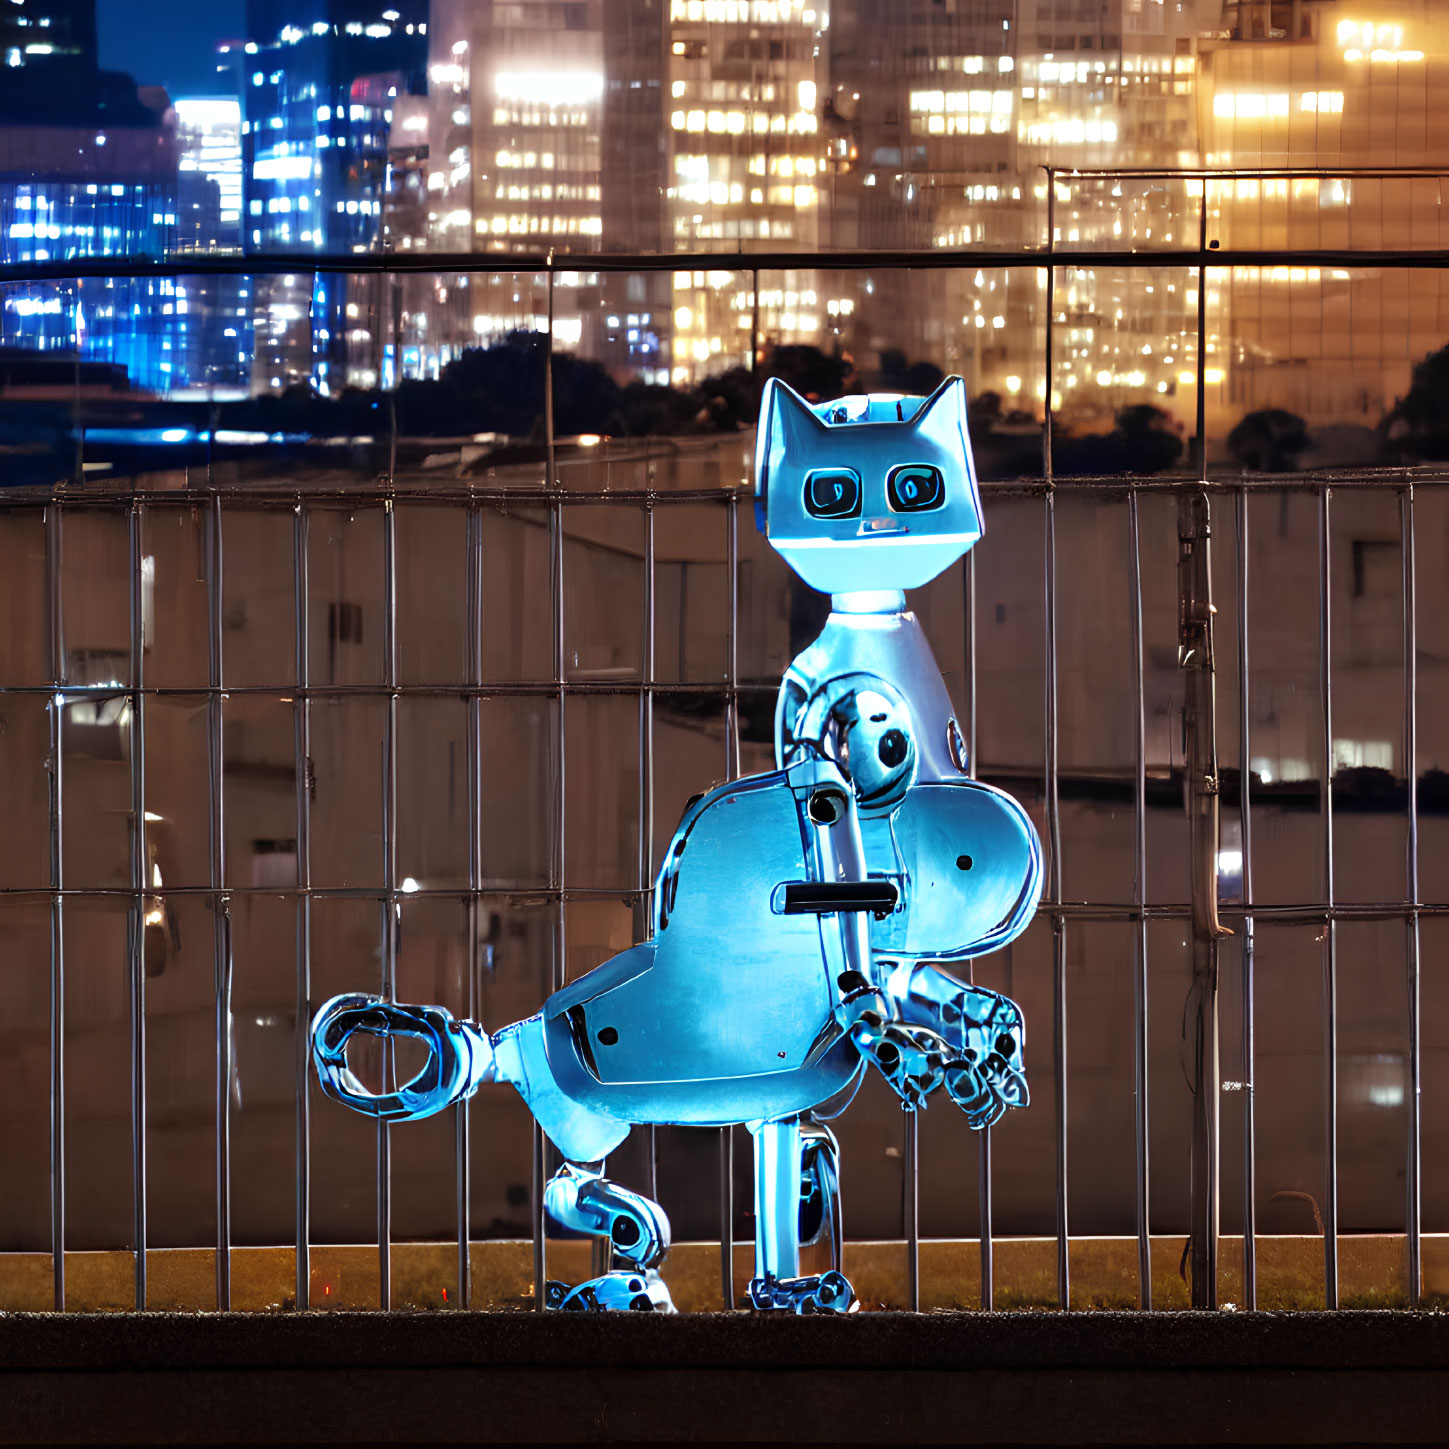 Metallic blue robot with cat-like head and large eyes in nighttime cityscape